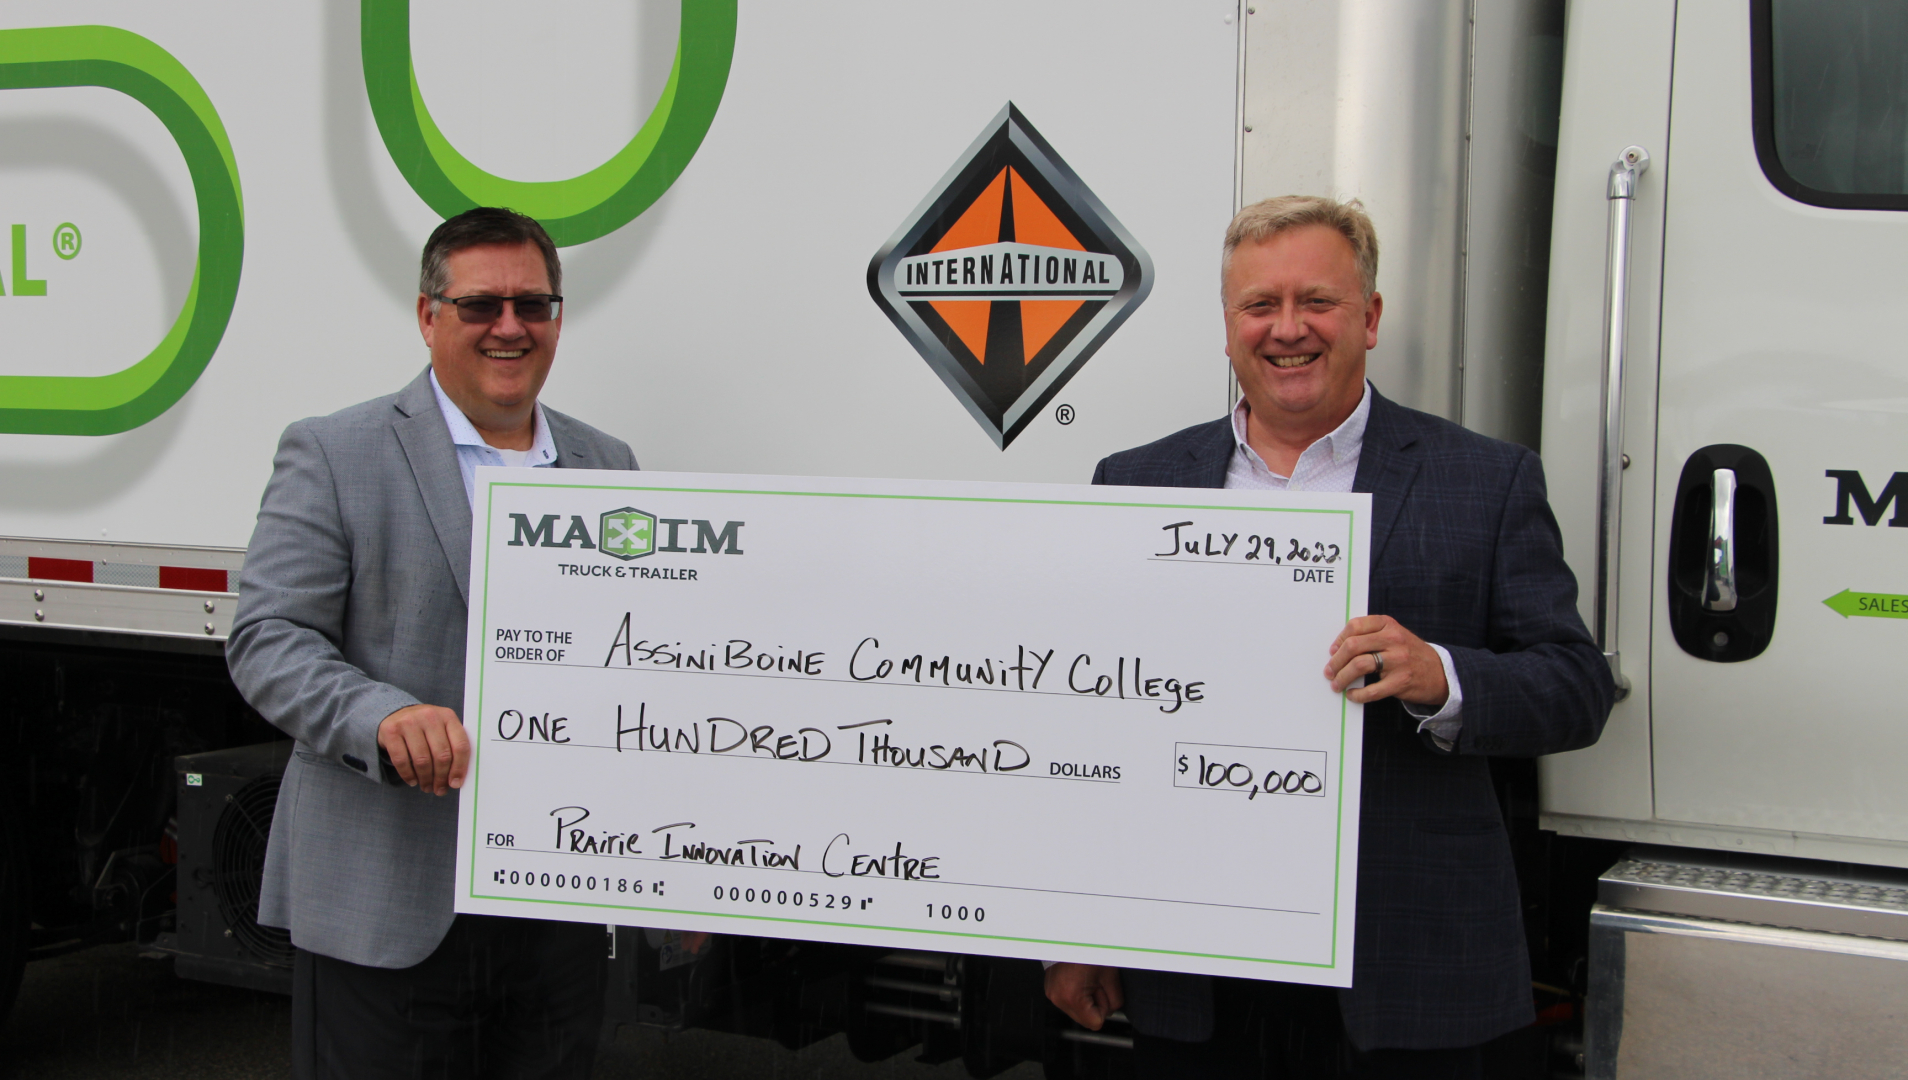 Troy Hamilton, President of Maxim Truck & Trailer with Derrick Turner, Director of Advancement & External Relations at Assiniboine